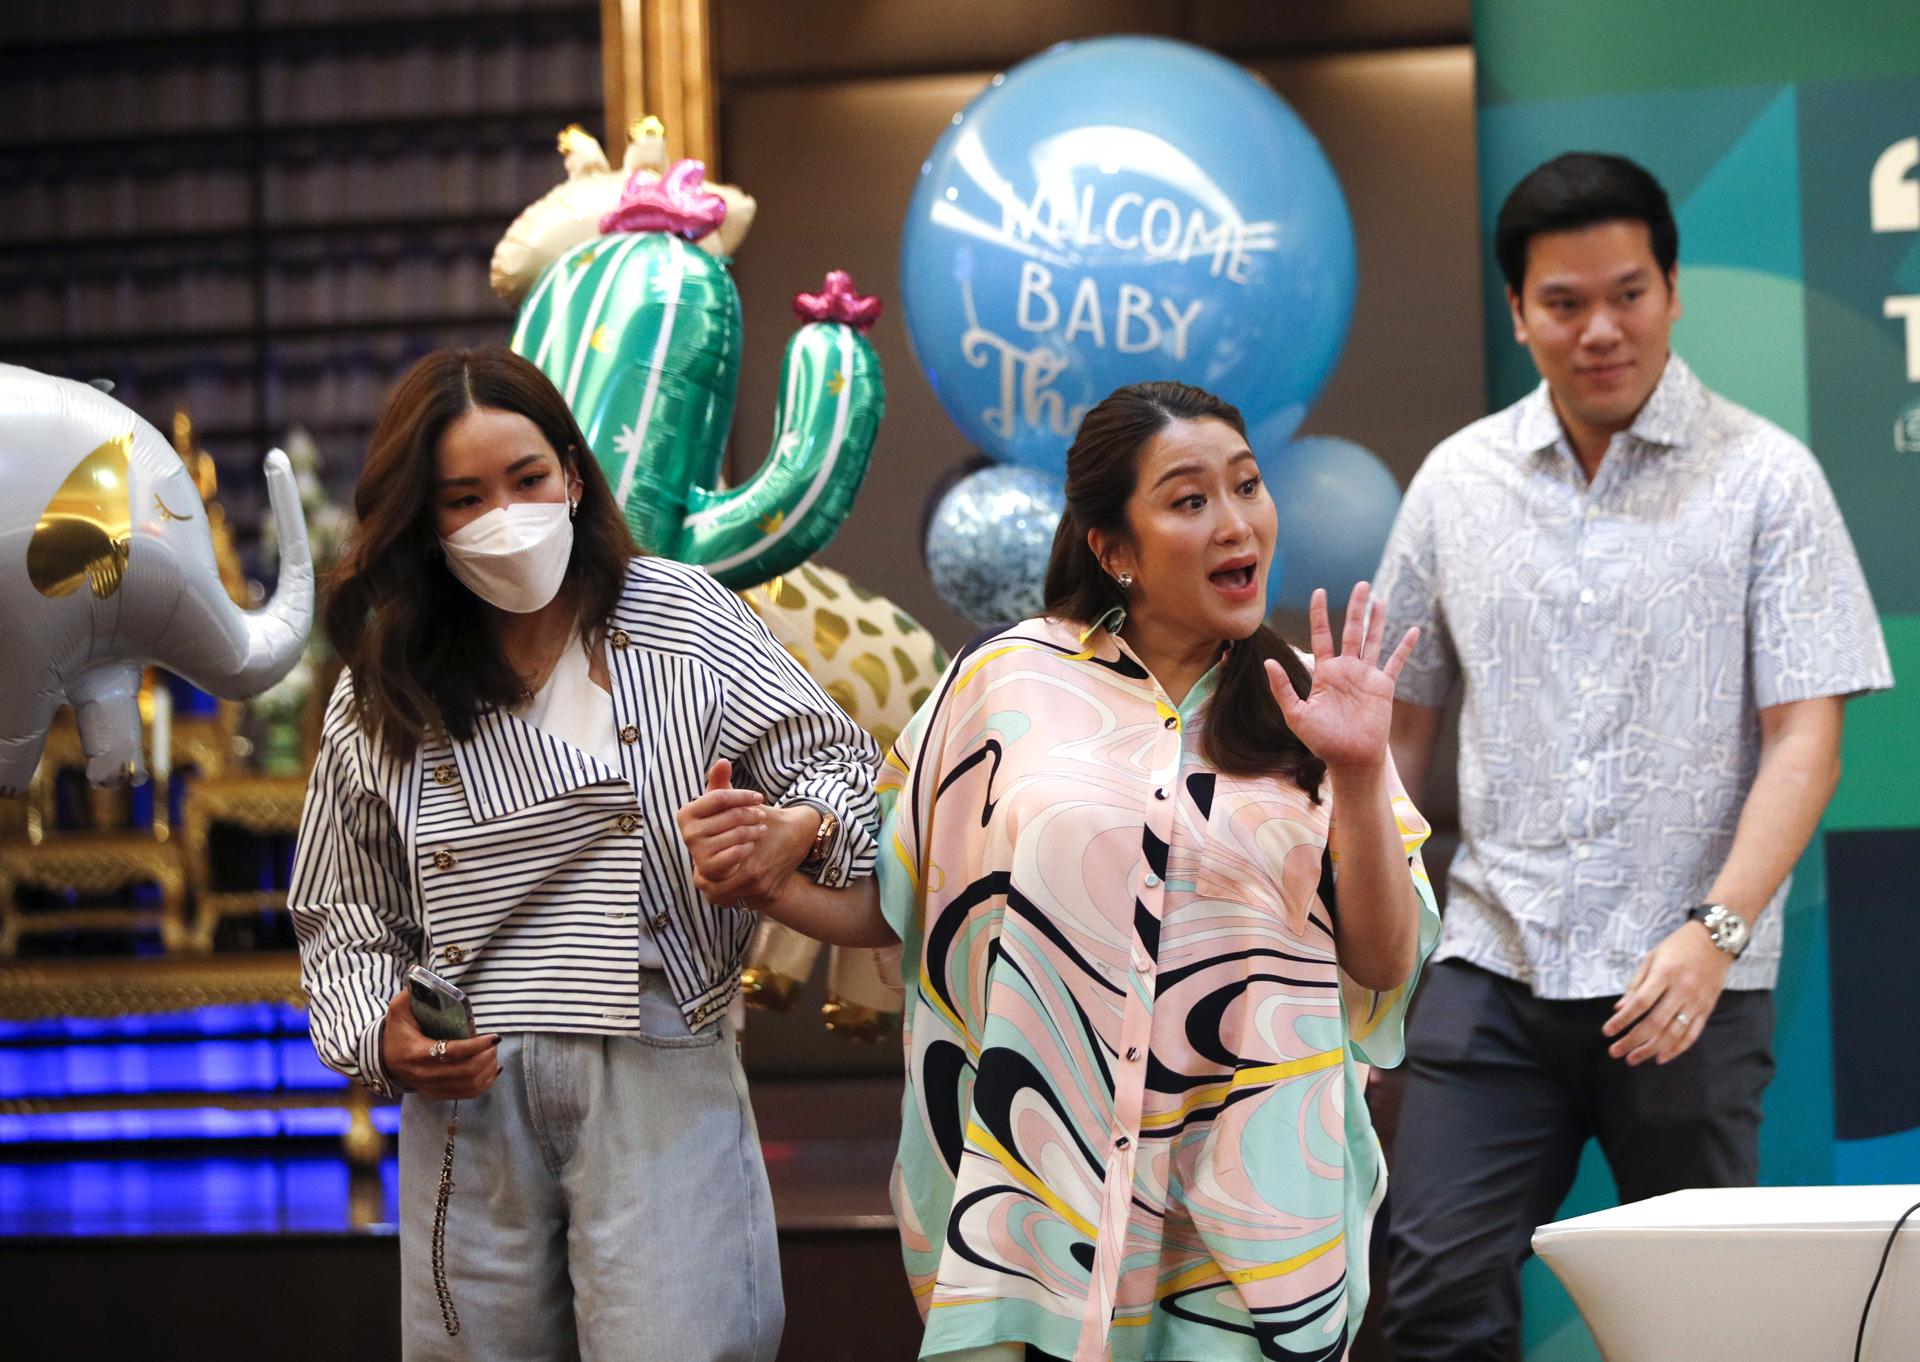 Pheu Thai Party's Prime Ministerial candidate Paetongtarn Shinawatra waves to journalists as she is escorted by her elder sister Pinthongta and her husband Pidok Sooksawas during a press conference after giving birth to her son at a hospital in Bangkok, Thailand, 03 May 2023. EFE-EPA/RUNGROJ YONGRIT